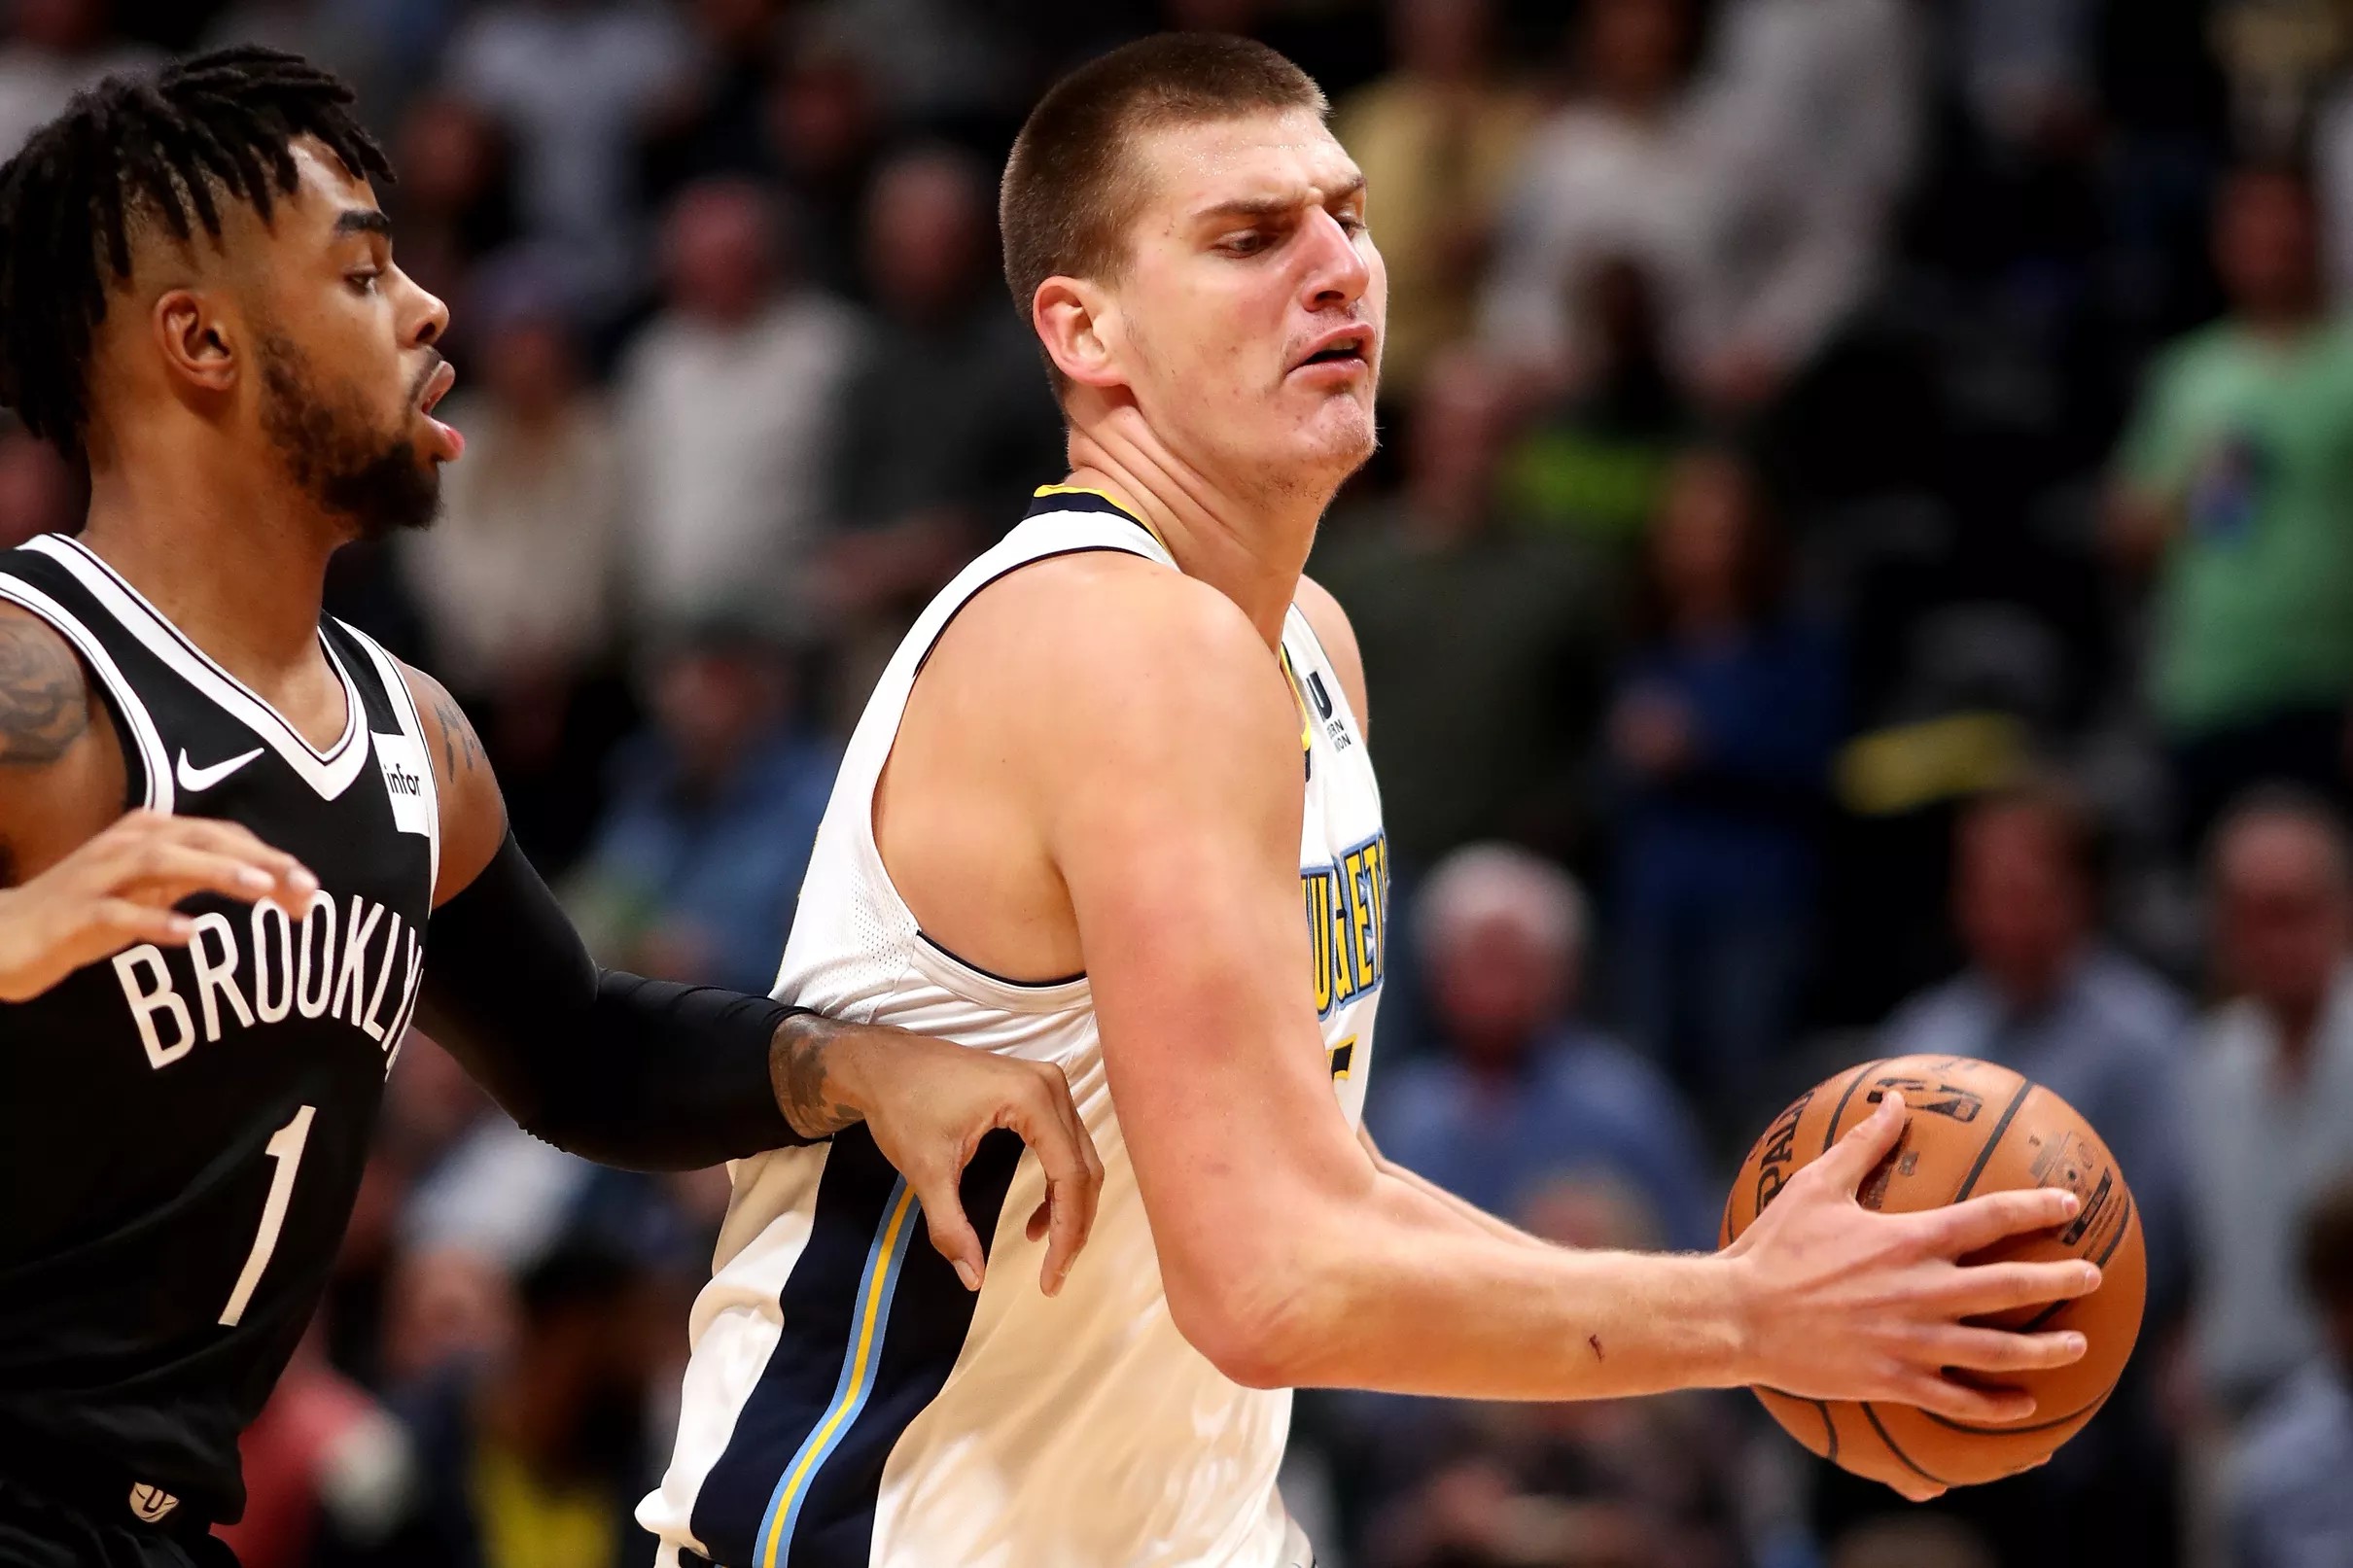 Watch: Nikola Jokic scores a career-high 41 points against the Nets